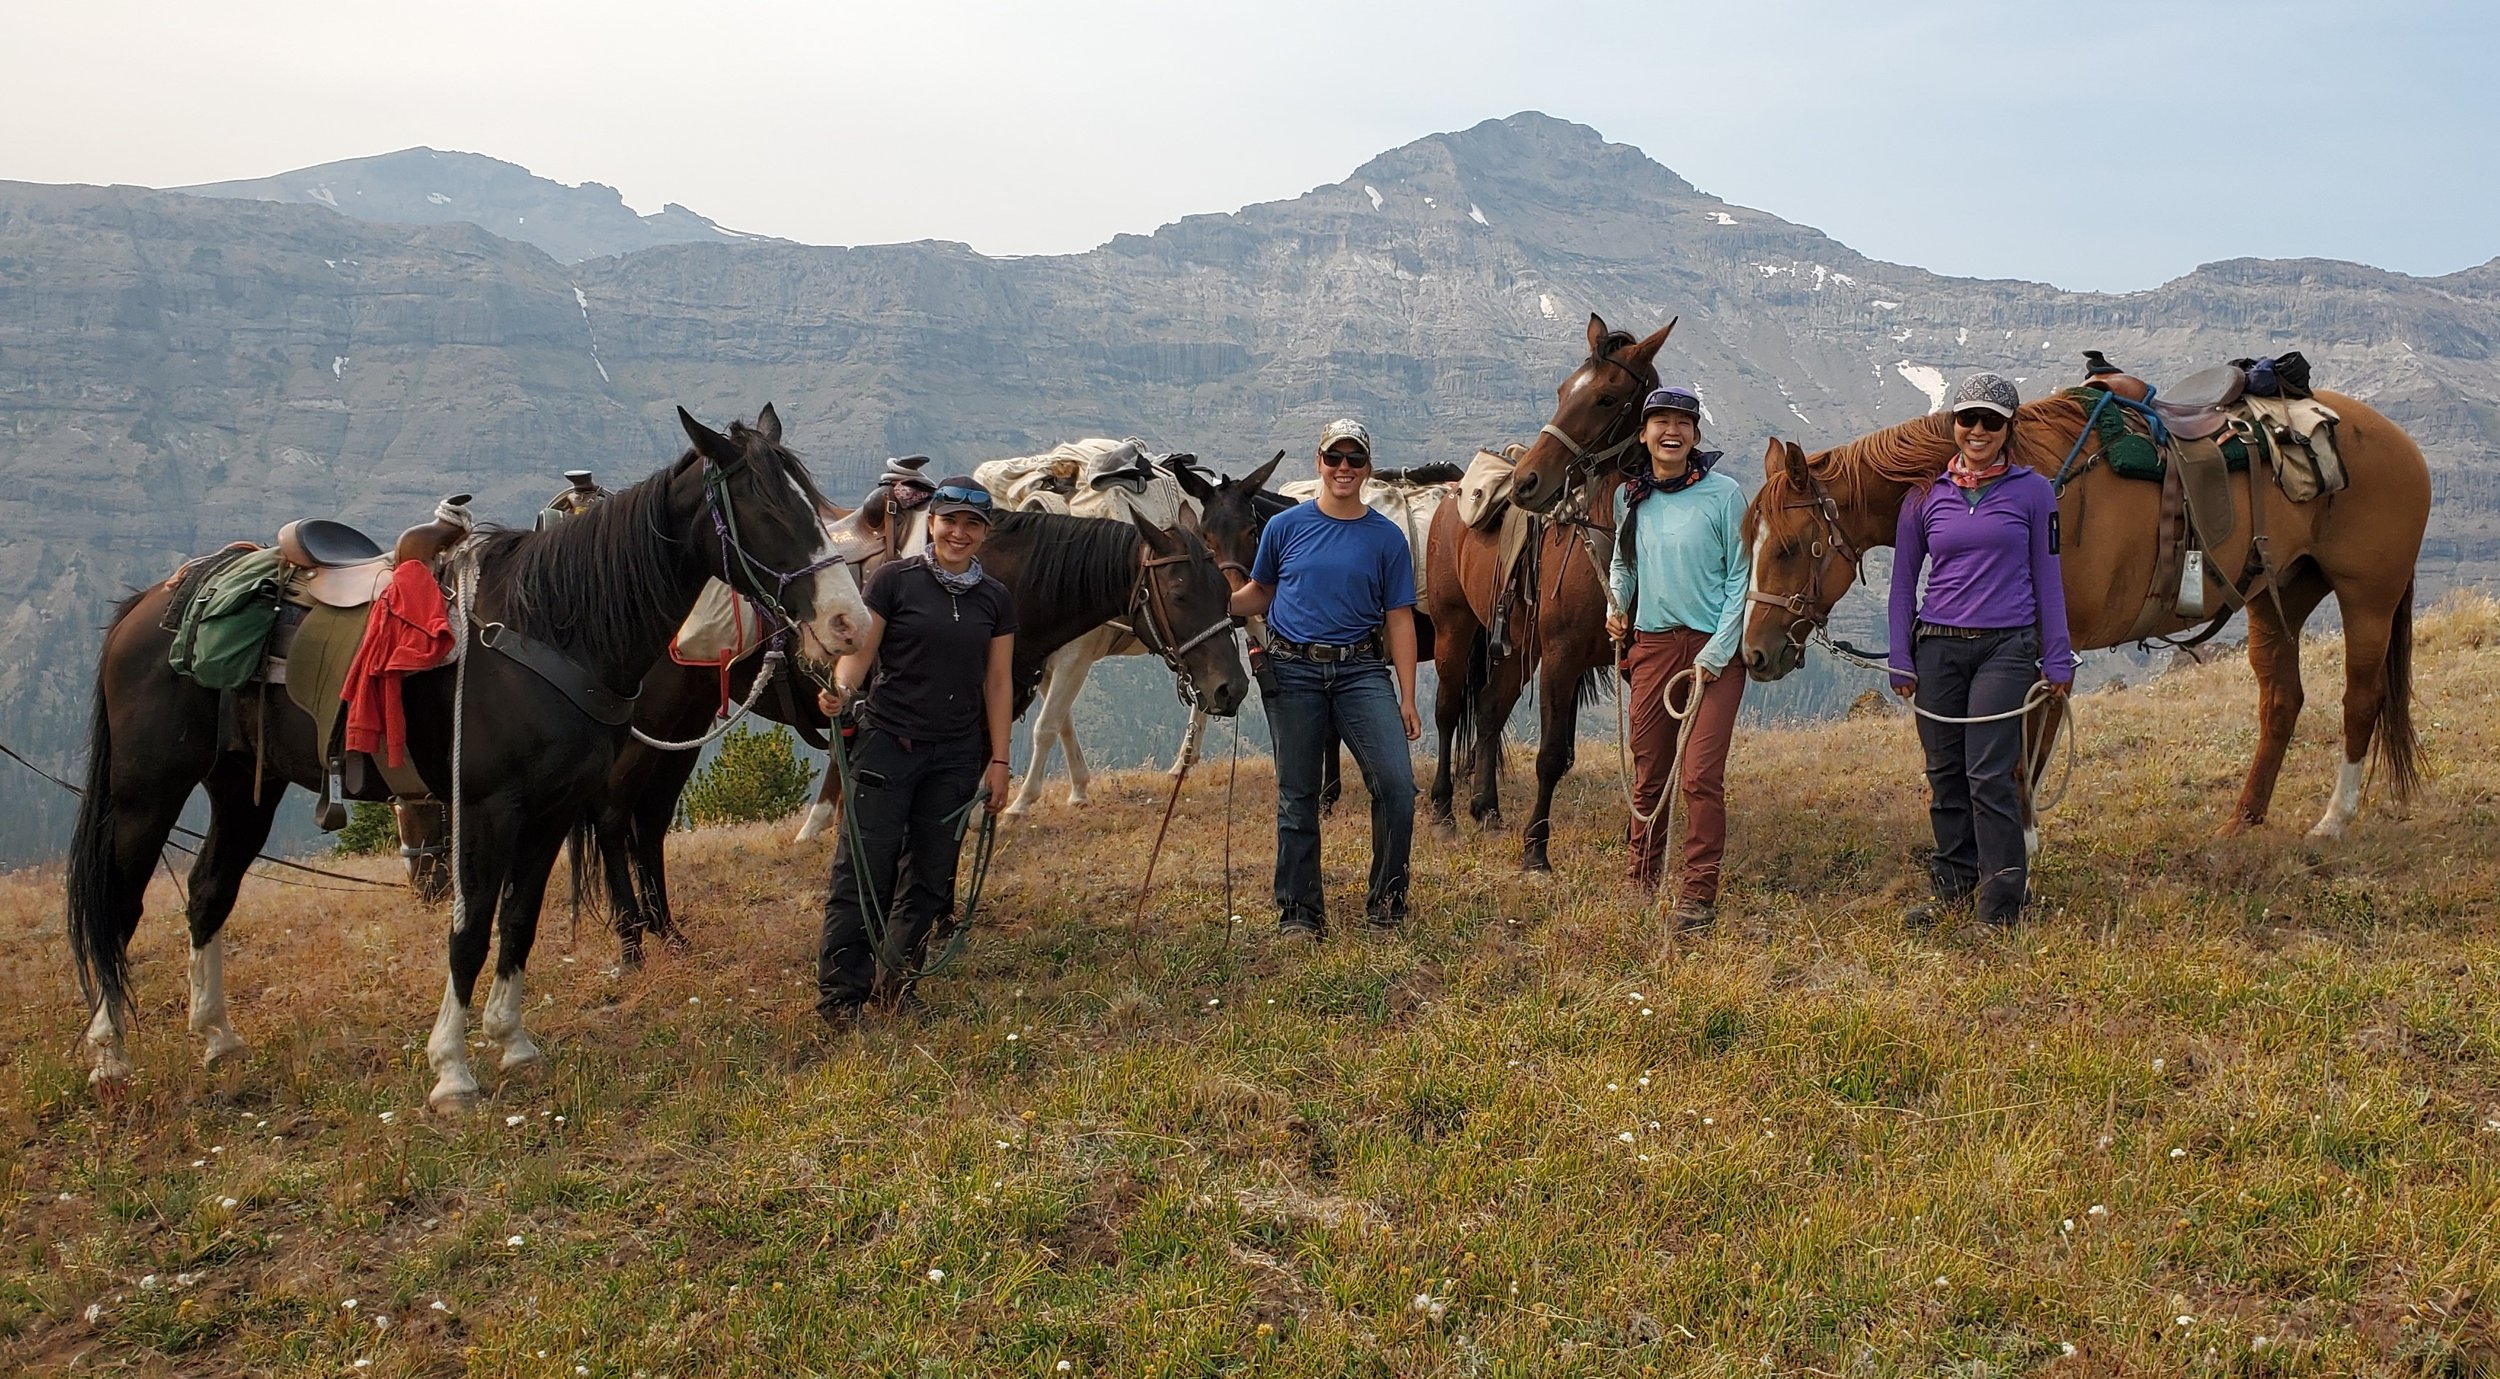  Summer 2020 - Group picture (Guada, April, me &amp; Stephi) from Day 2 of our ride into the Thorofare in the Shoshone National Forest to check wolf GPS locations and collect scat for a pack that migrates to elk summer range by shifting their homesit